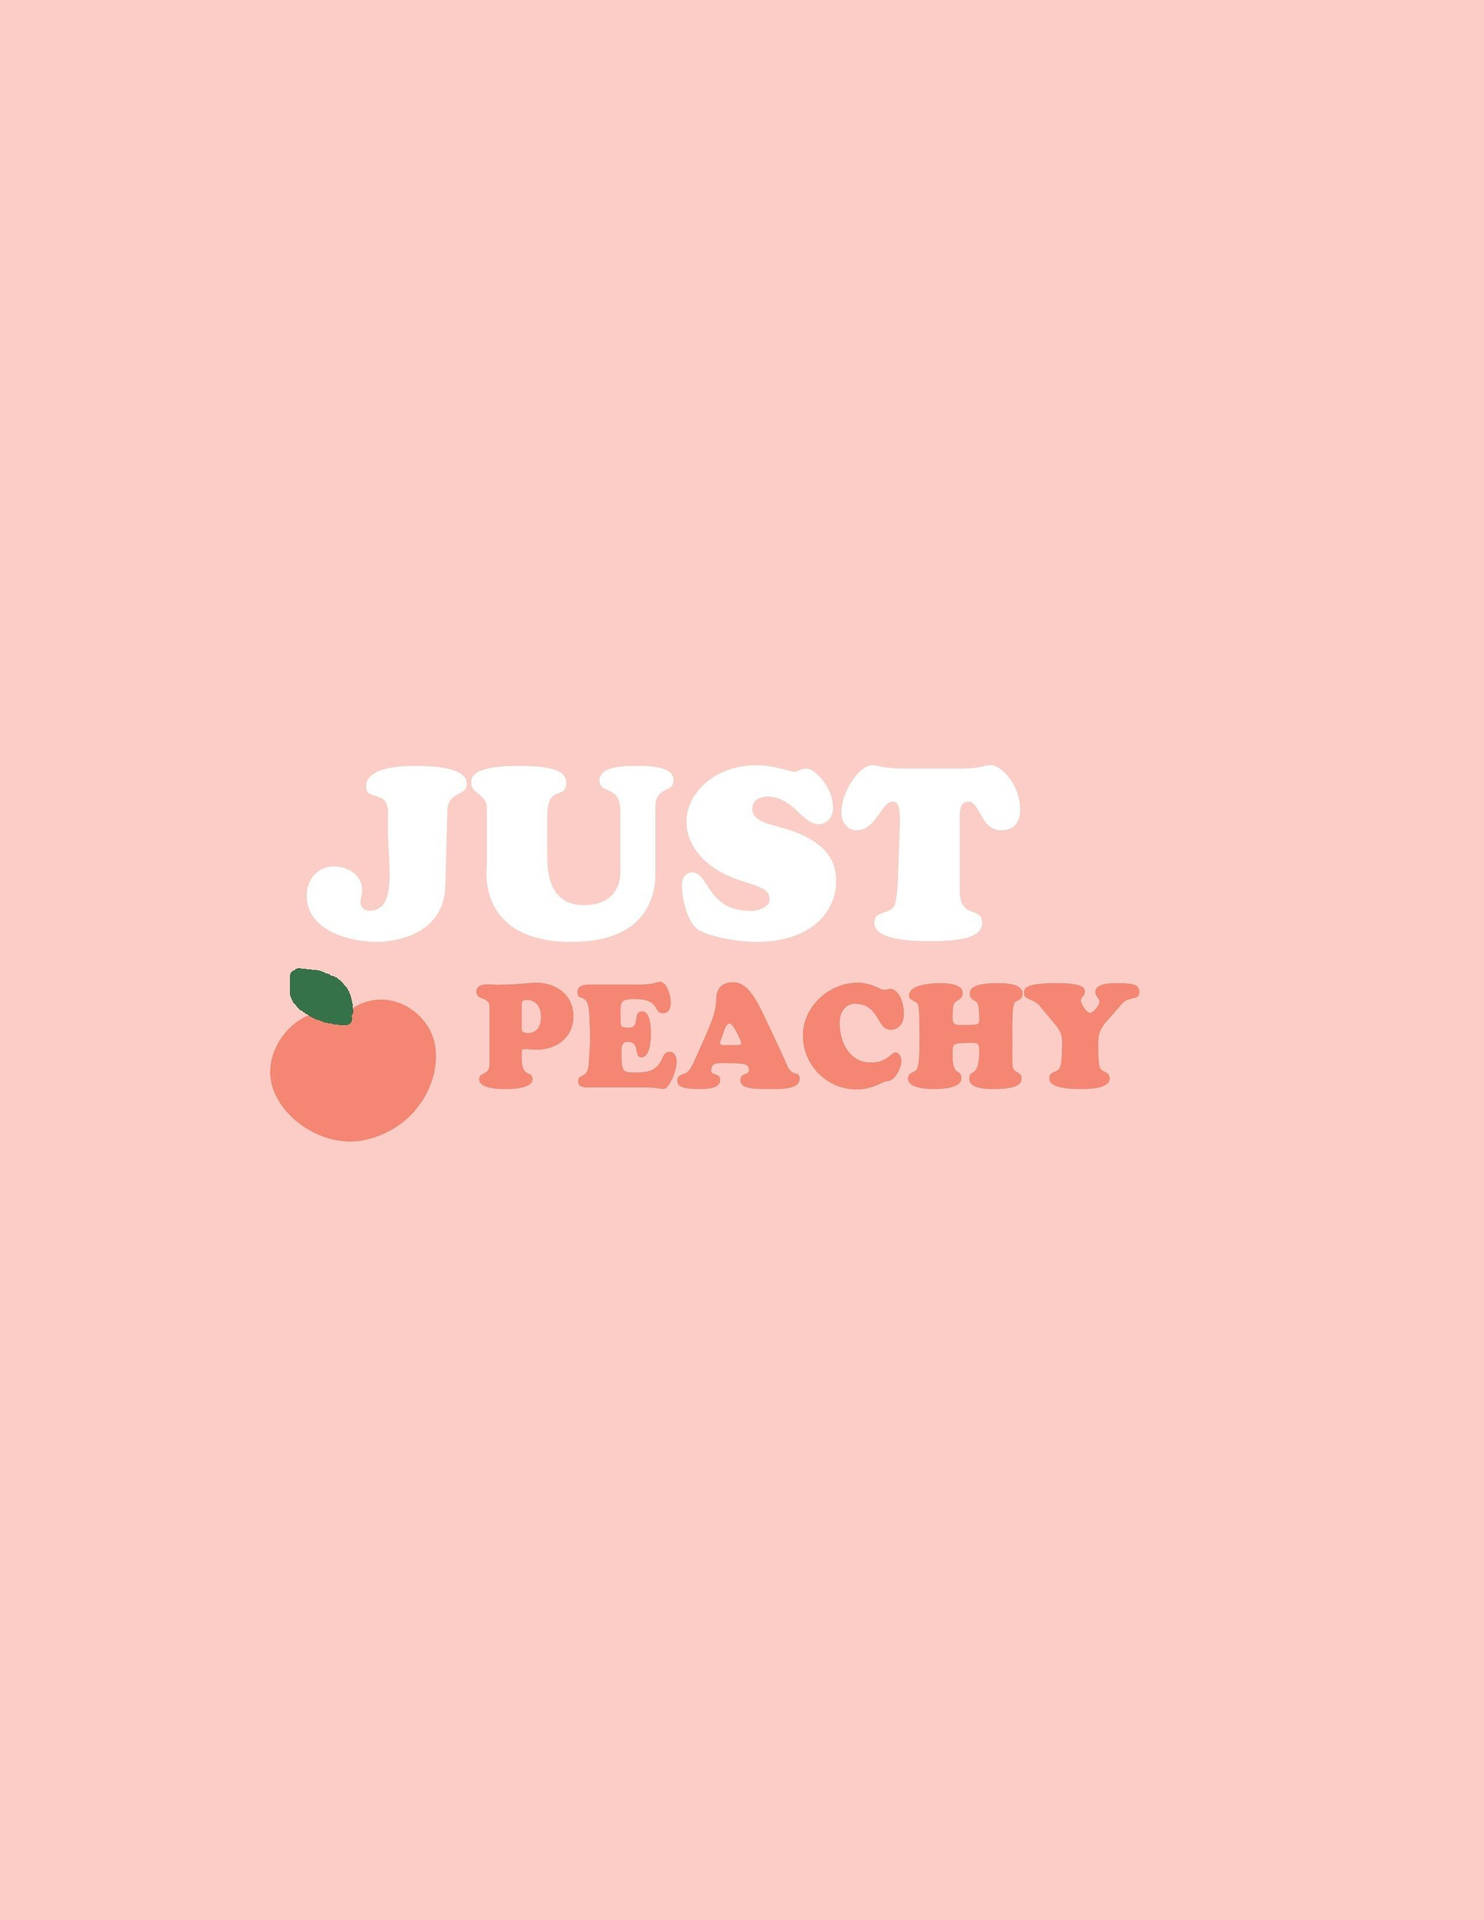 25 Peach Collage Wallpapers  Aesthetic Peachy Collage  Idea Wallpapers   iPhone WallpapersColor Schemes